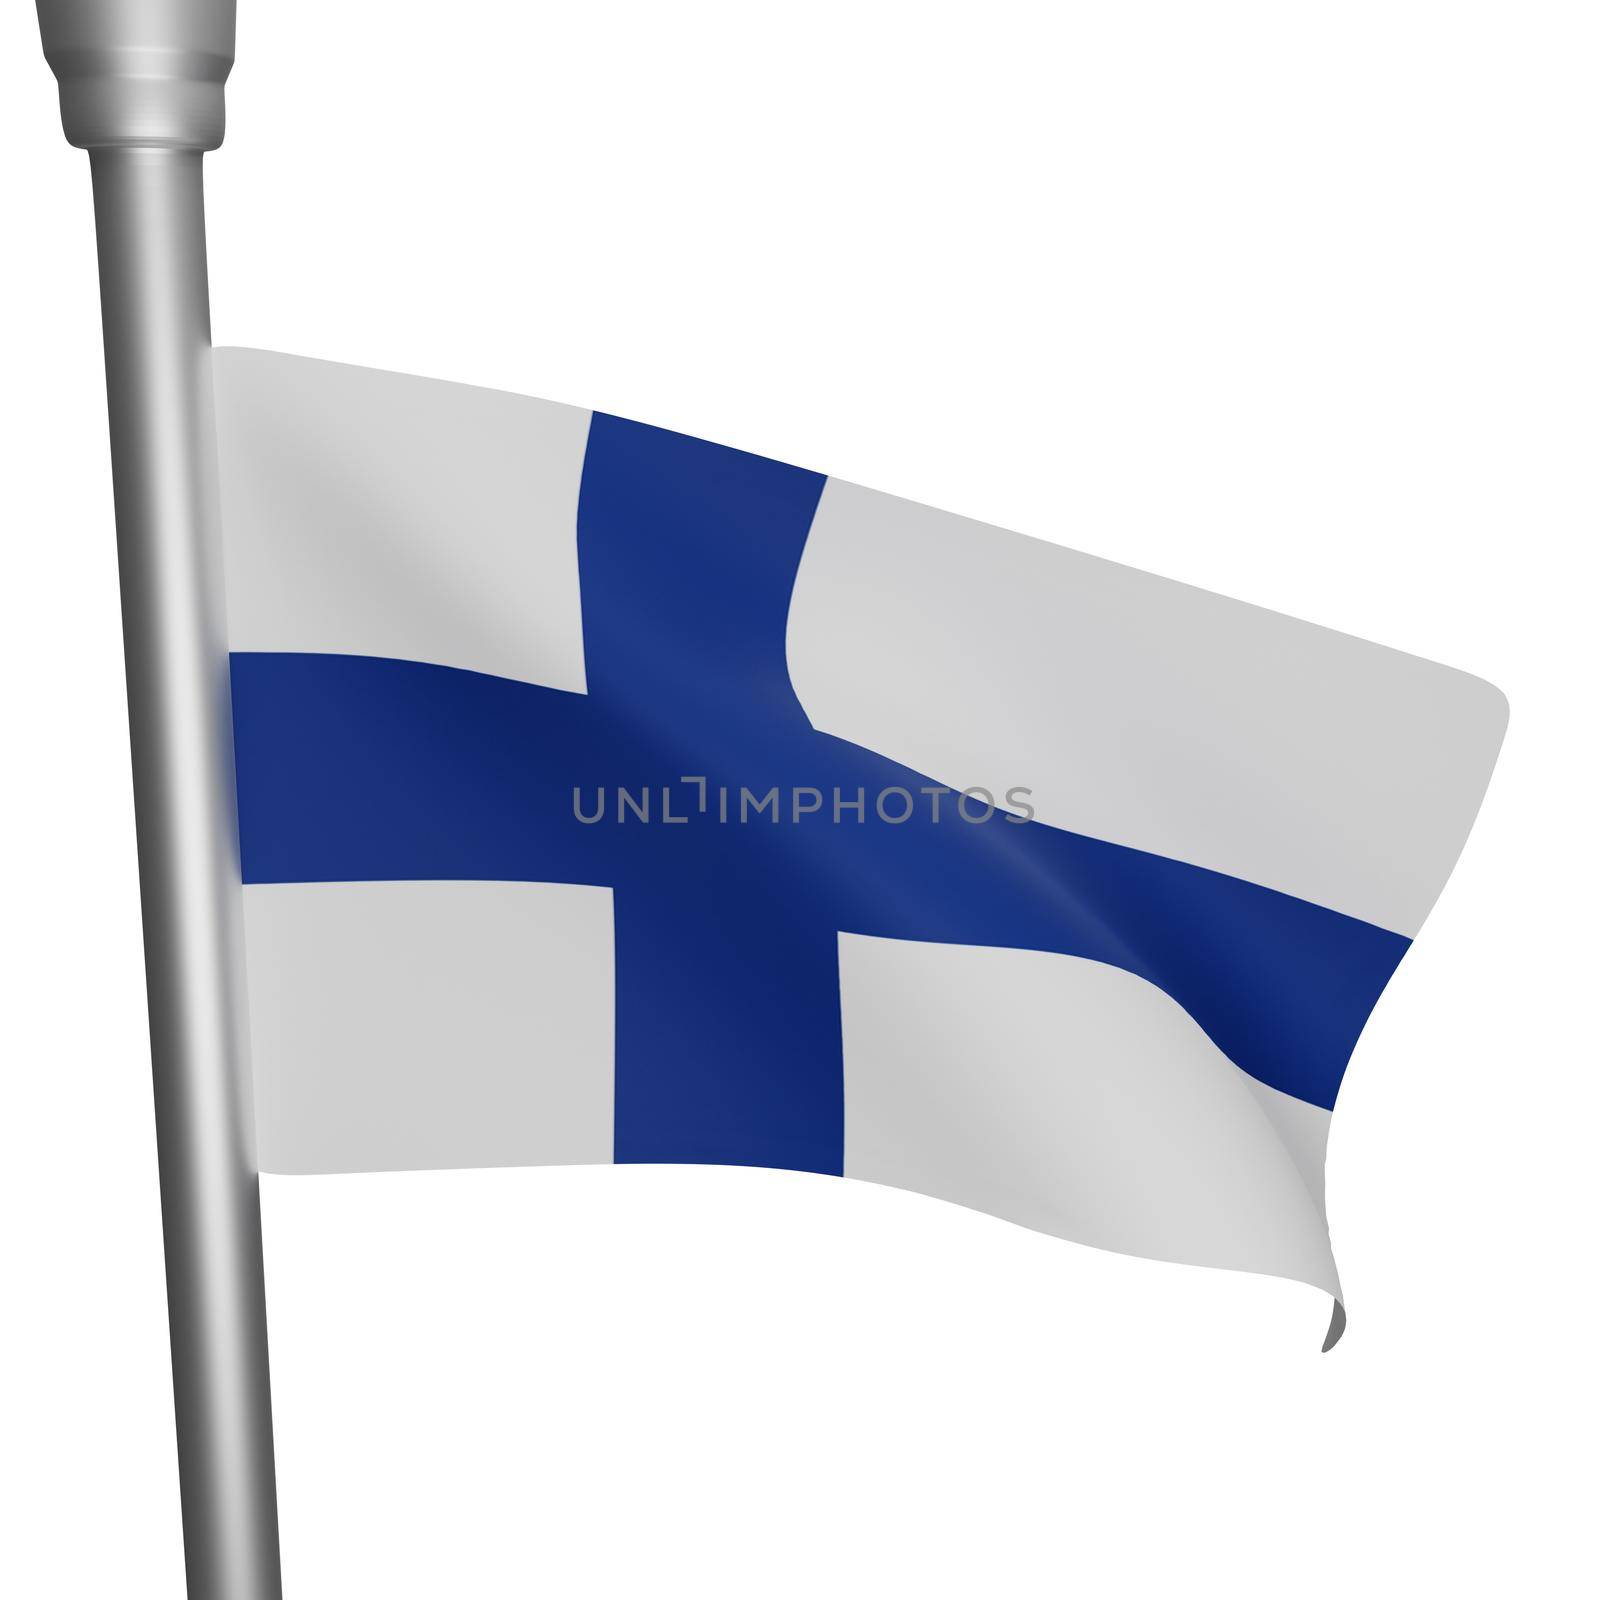 3d rendering of finland flag concept finland national day